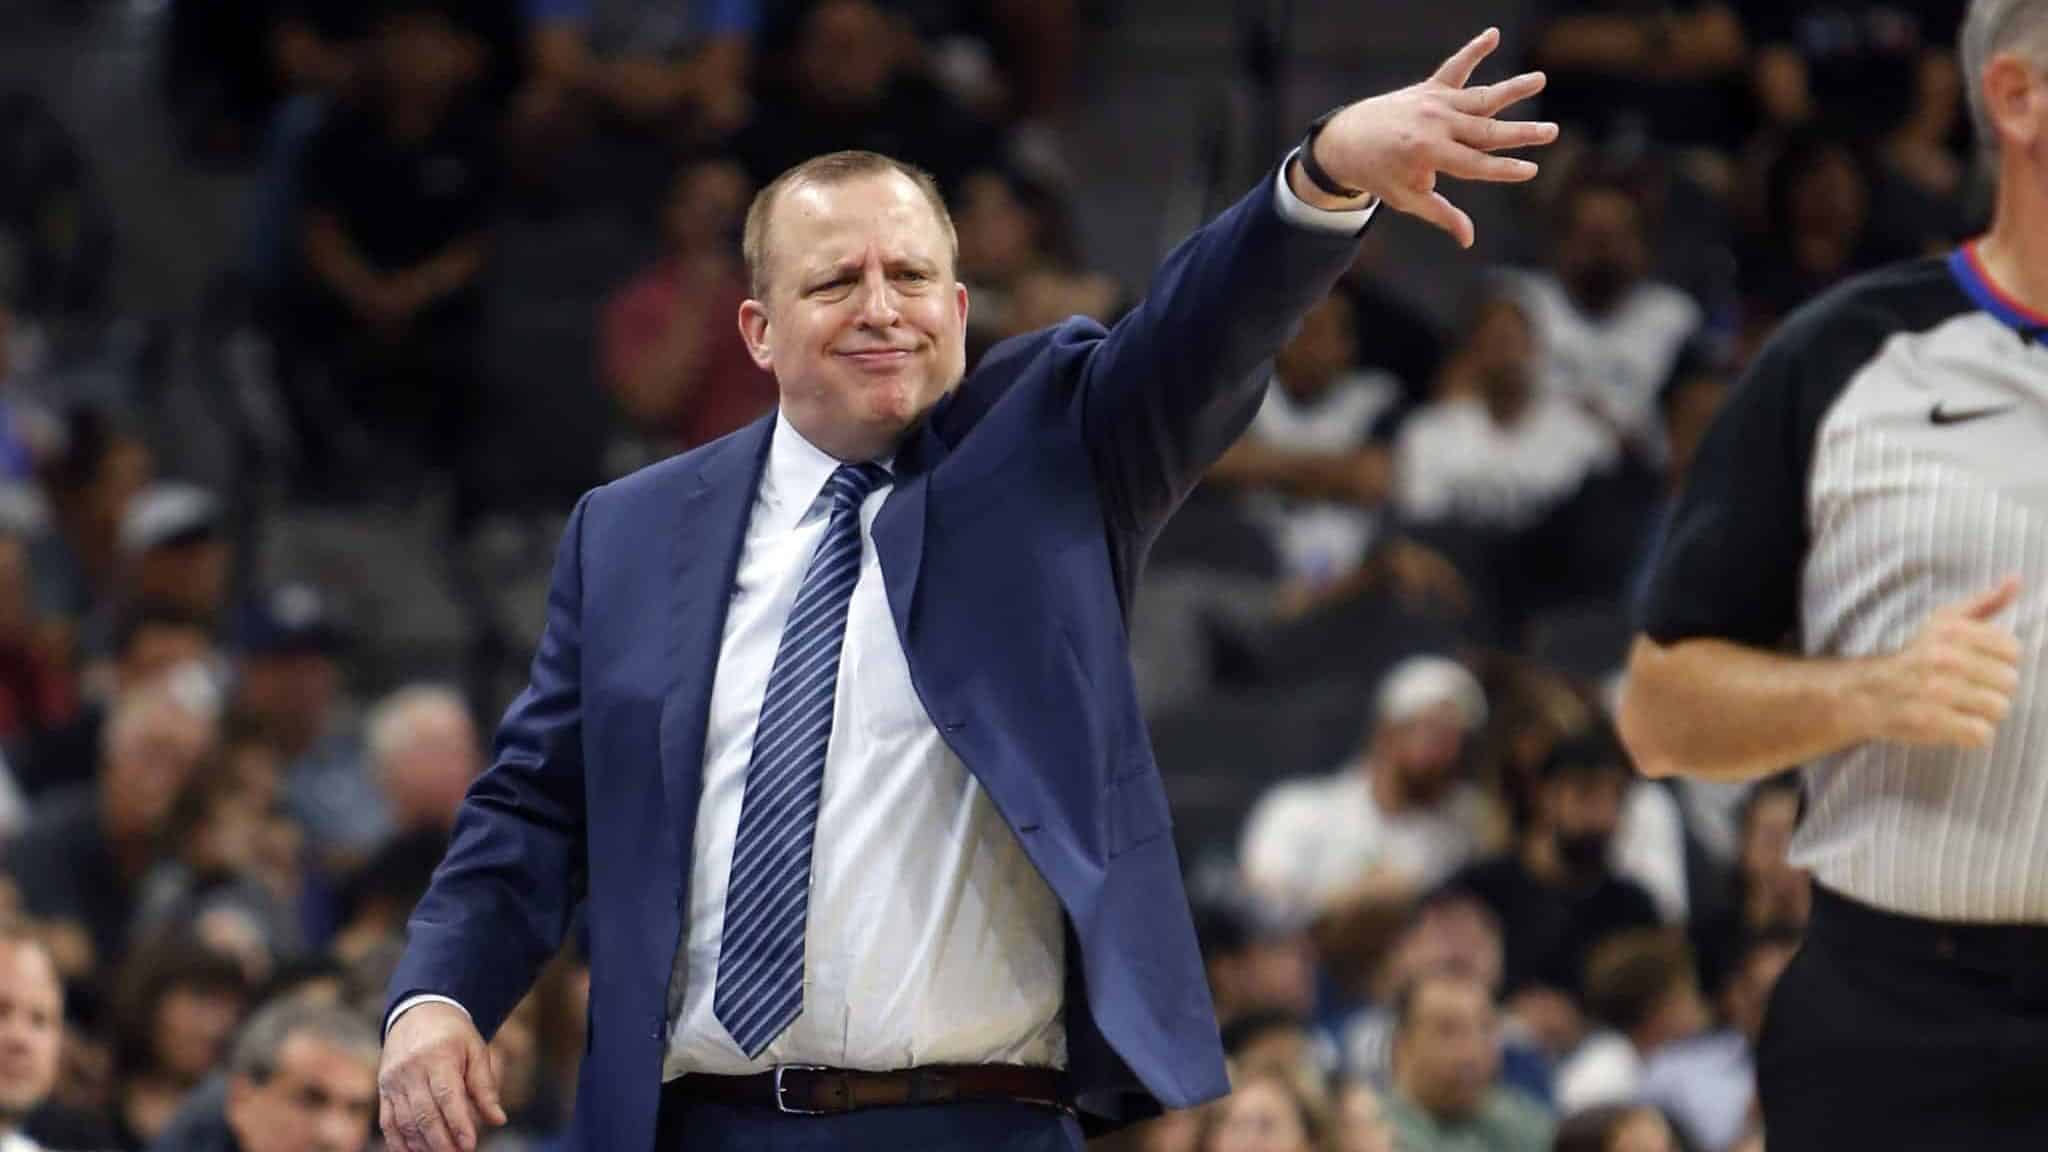 SAN ANTONIO,TX - OCTOBER 18: Minnesota Timberwolves Tom Thibodeau shows his displeasure with the official during game against the San Antonio Spurs at AT&T Center on October 18, 2017 in San Antonio, Texas. NOTE TO USER: User expressly acknowledges and agrees that , by downloading and or using this photograph, User is consenting to the terms and conditions of the Getty Images License Agreement.